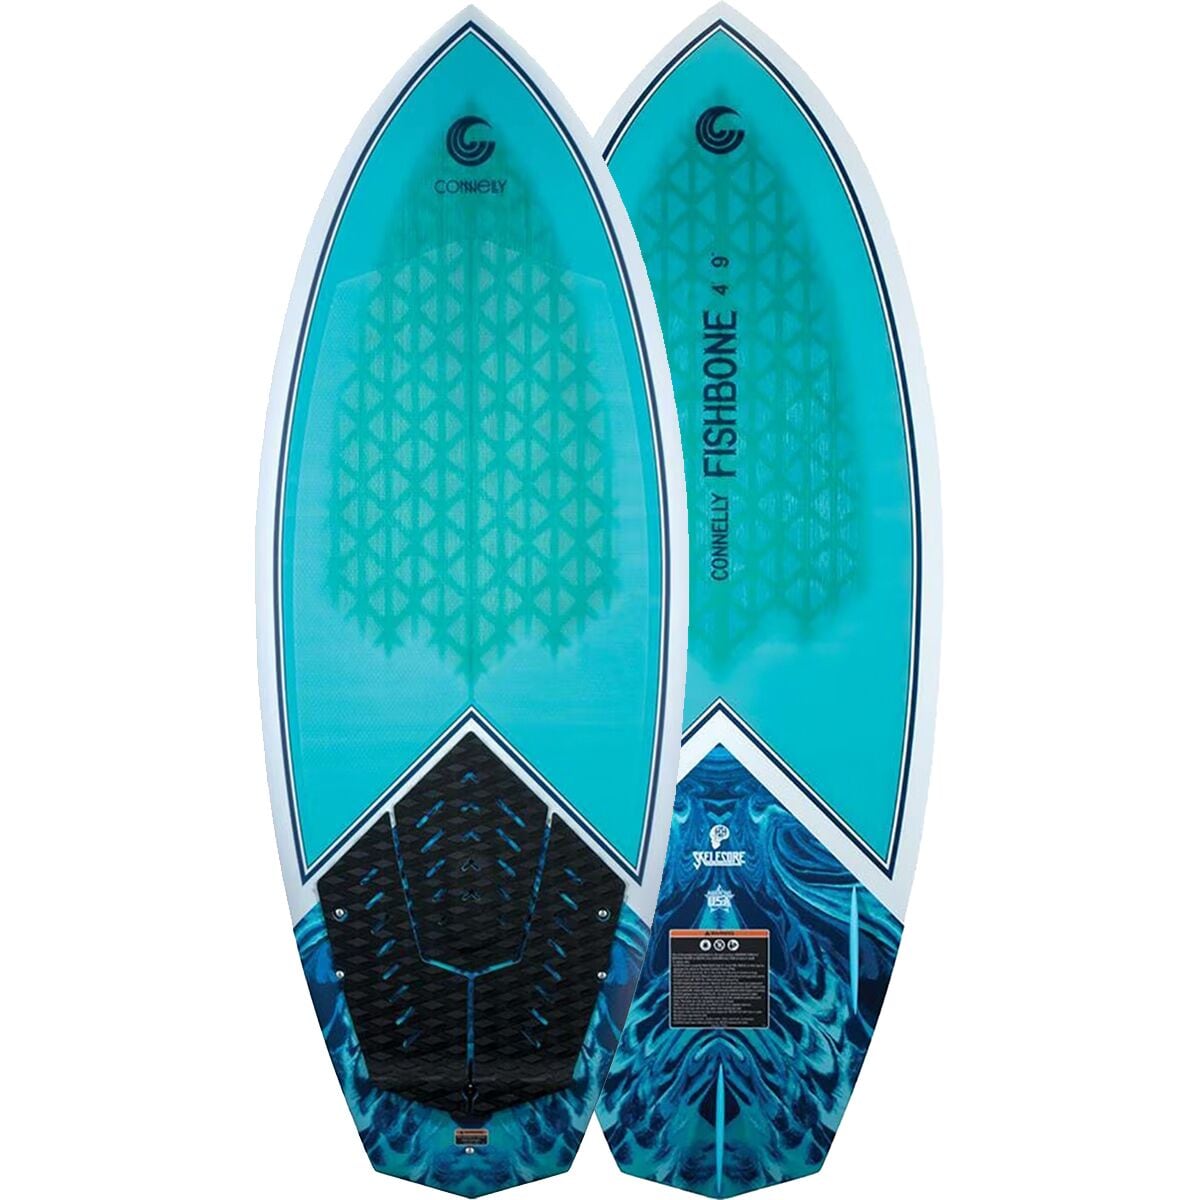 Connelly Skis Fishbone Wake Surfboard